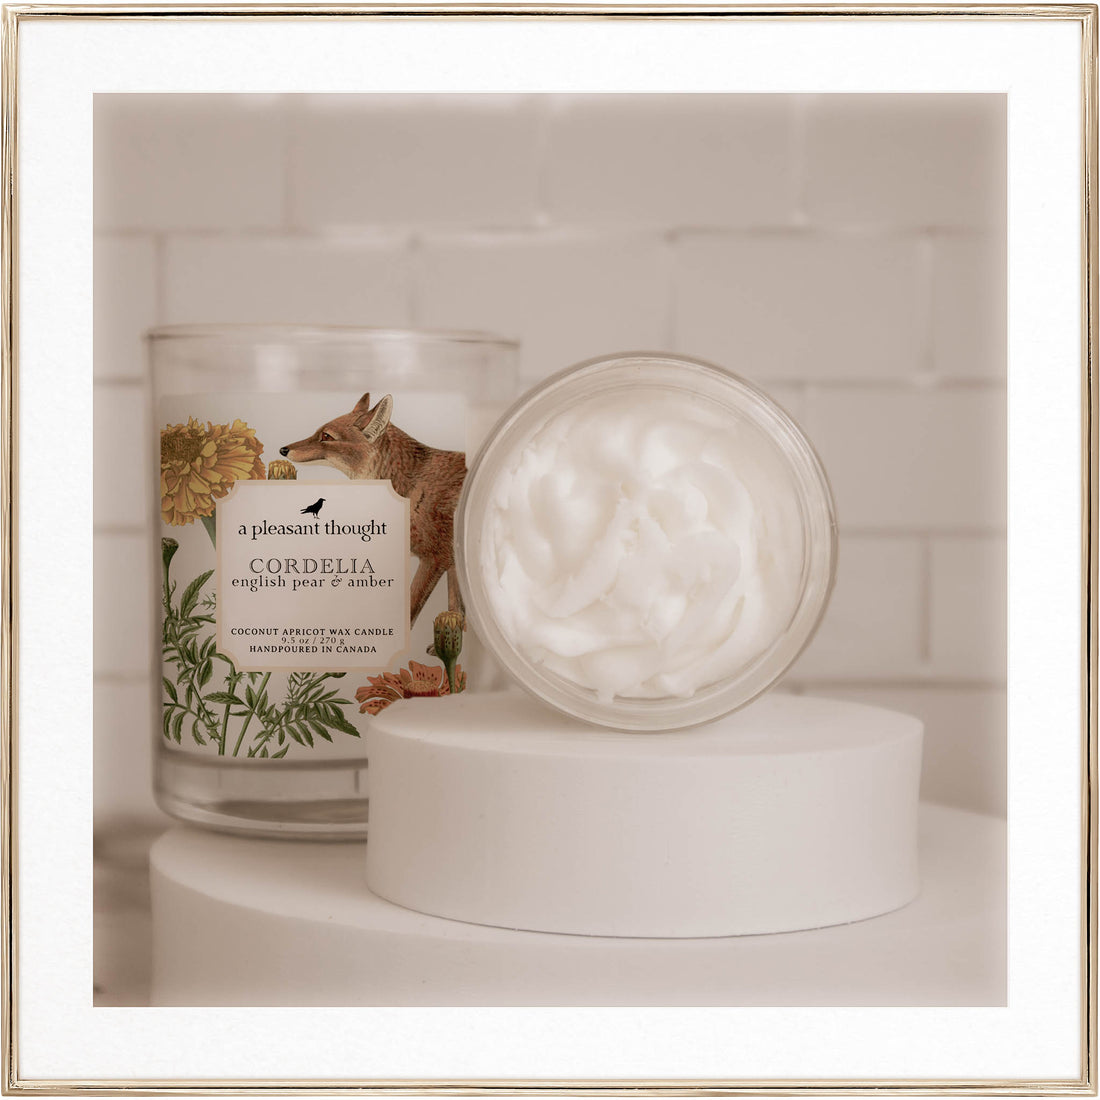  cordelia home fragrance a pleasant thought